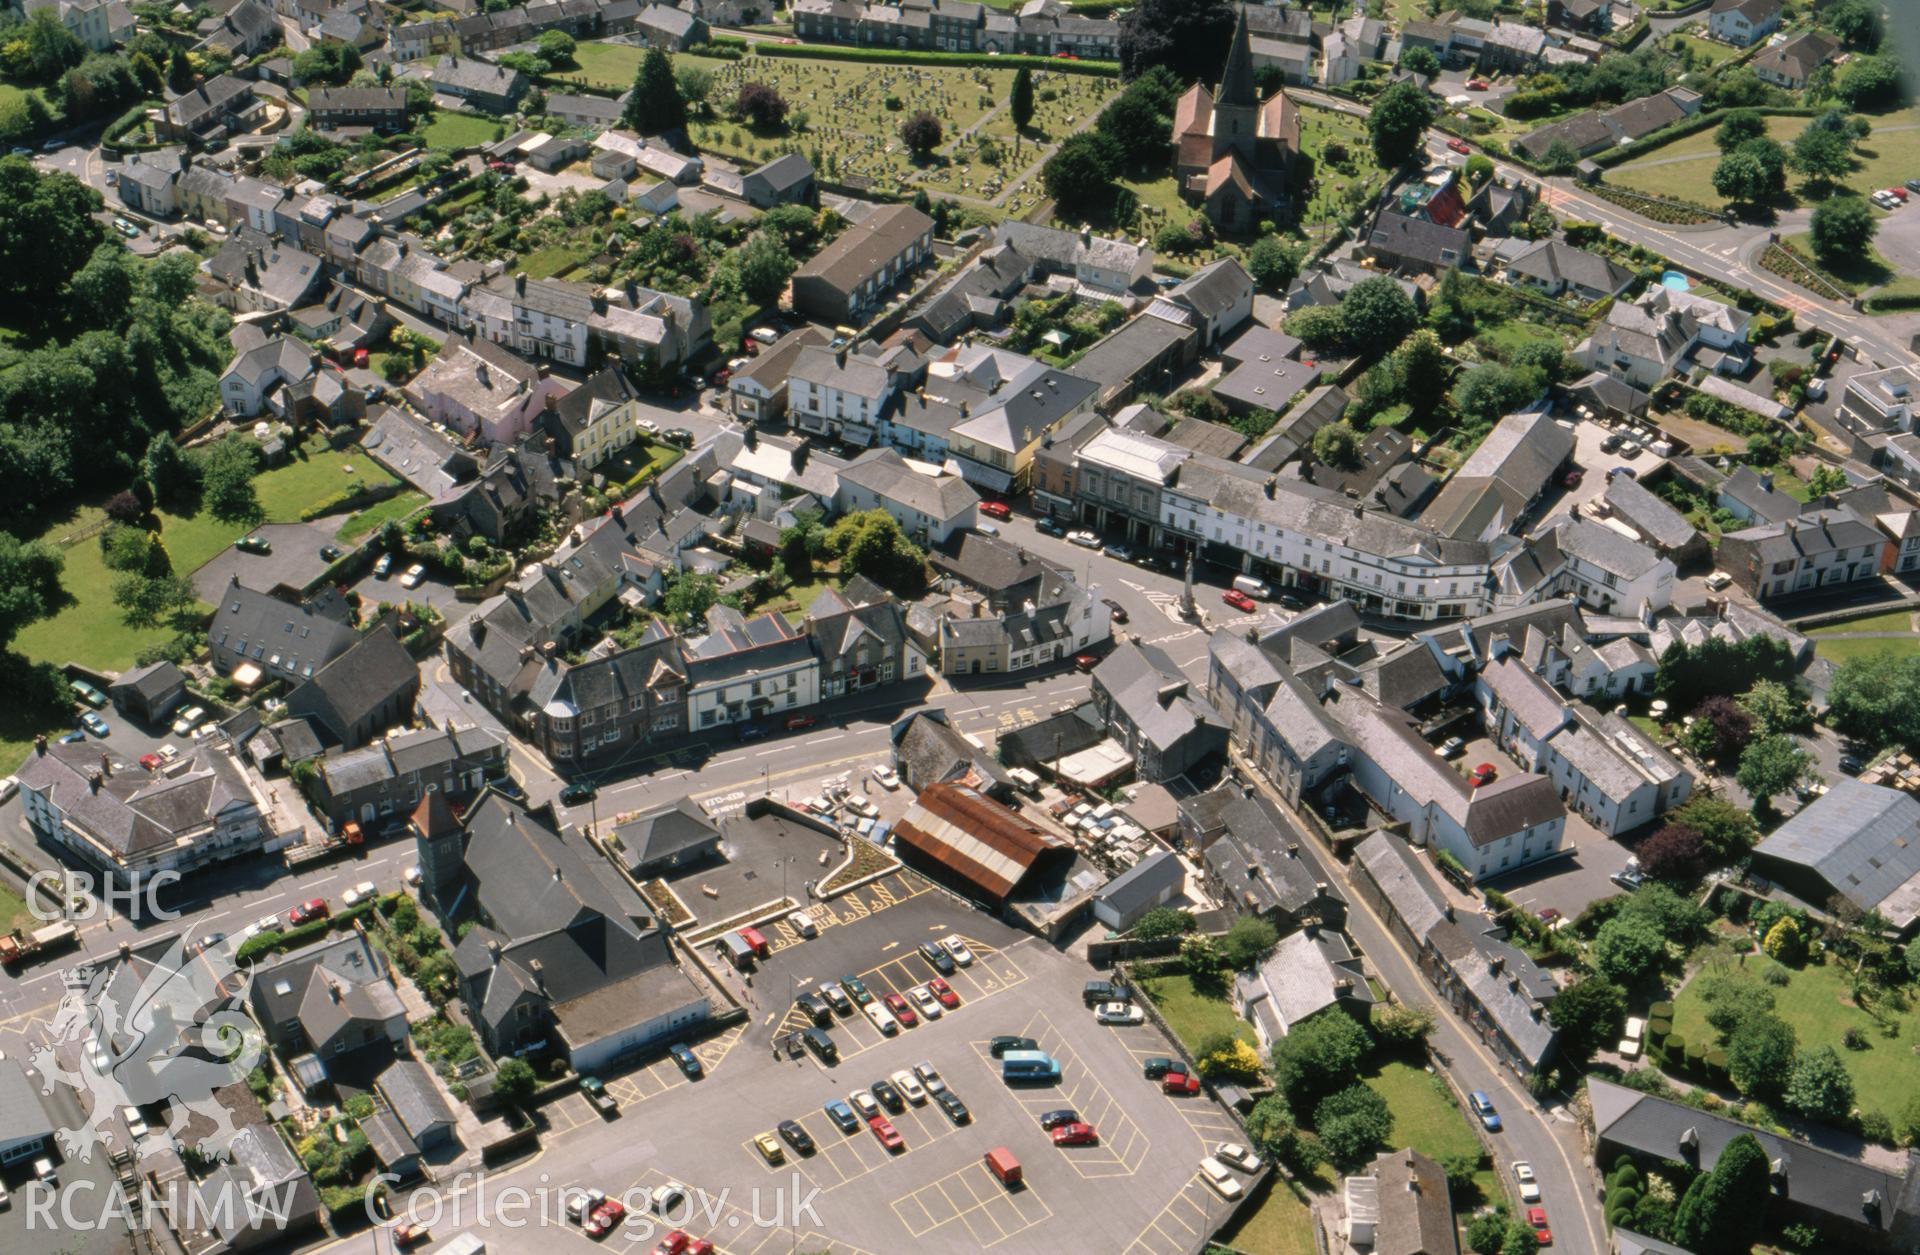 Aerial view of Crickhowell Town Centre,  taken by T.G. Driver, 2001.